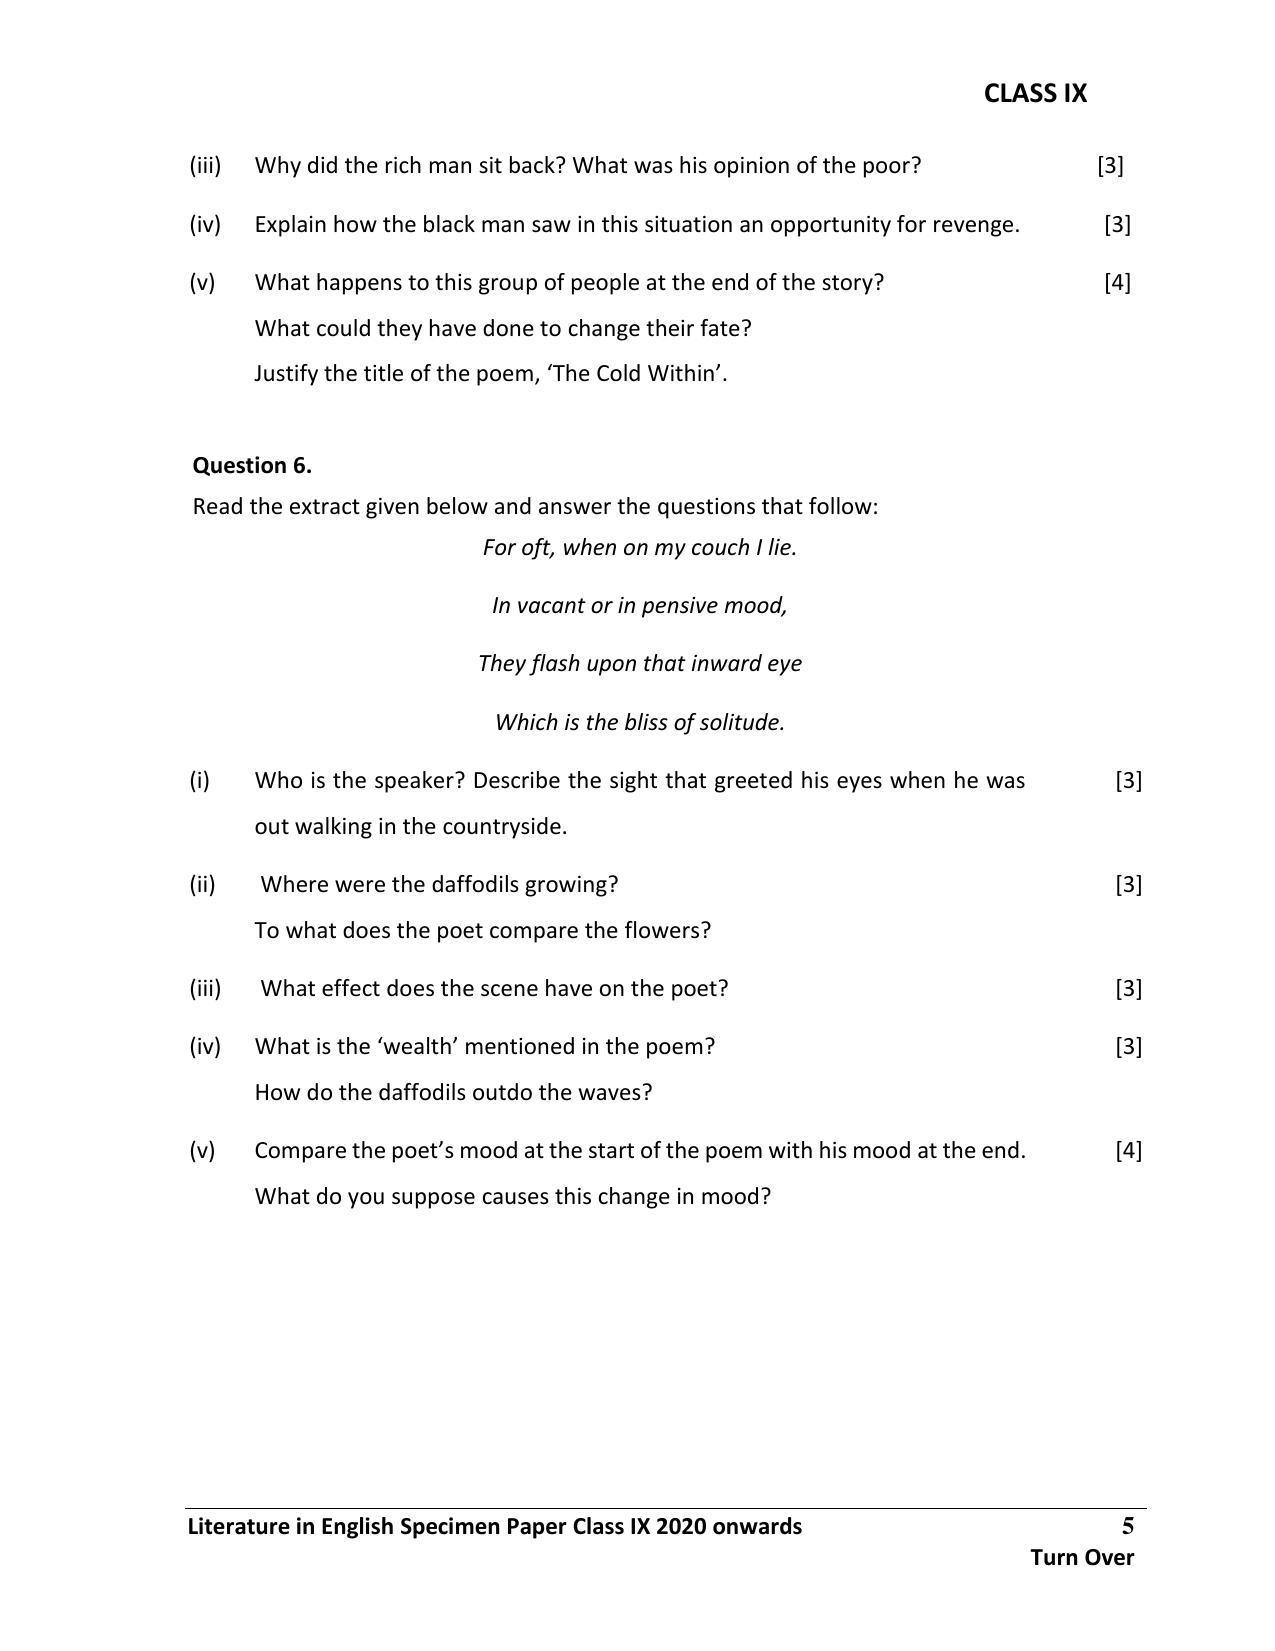  ICSE Class 9 English Paper 2 (LITERATURE IN ENGLISH) Sample Paper - Page 5